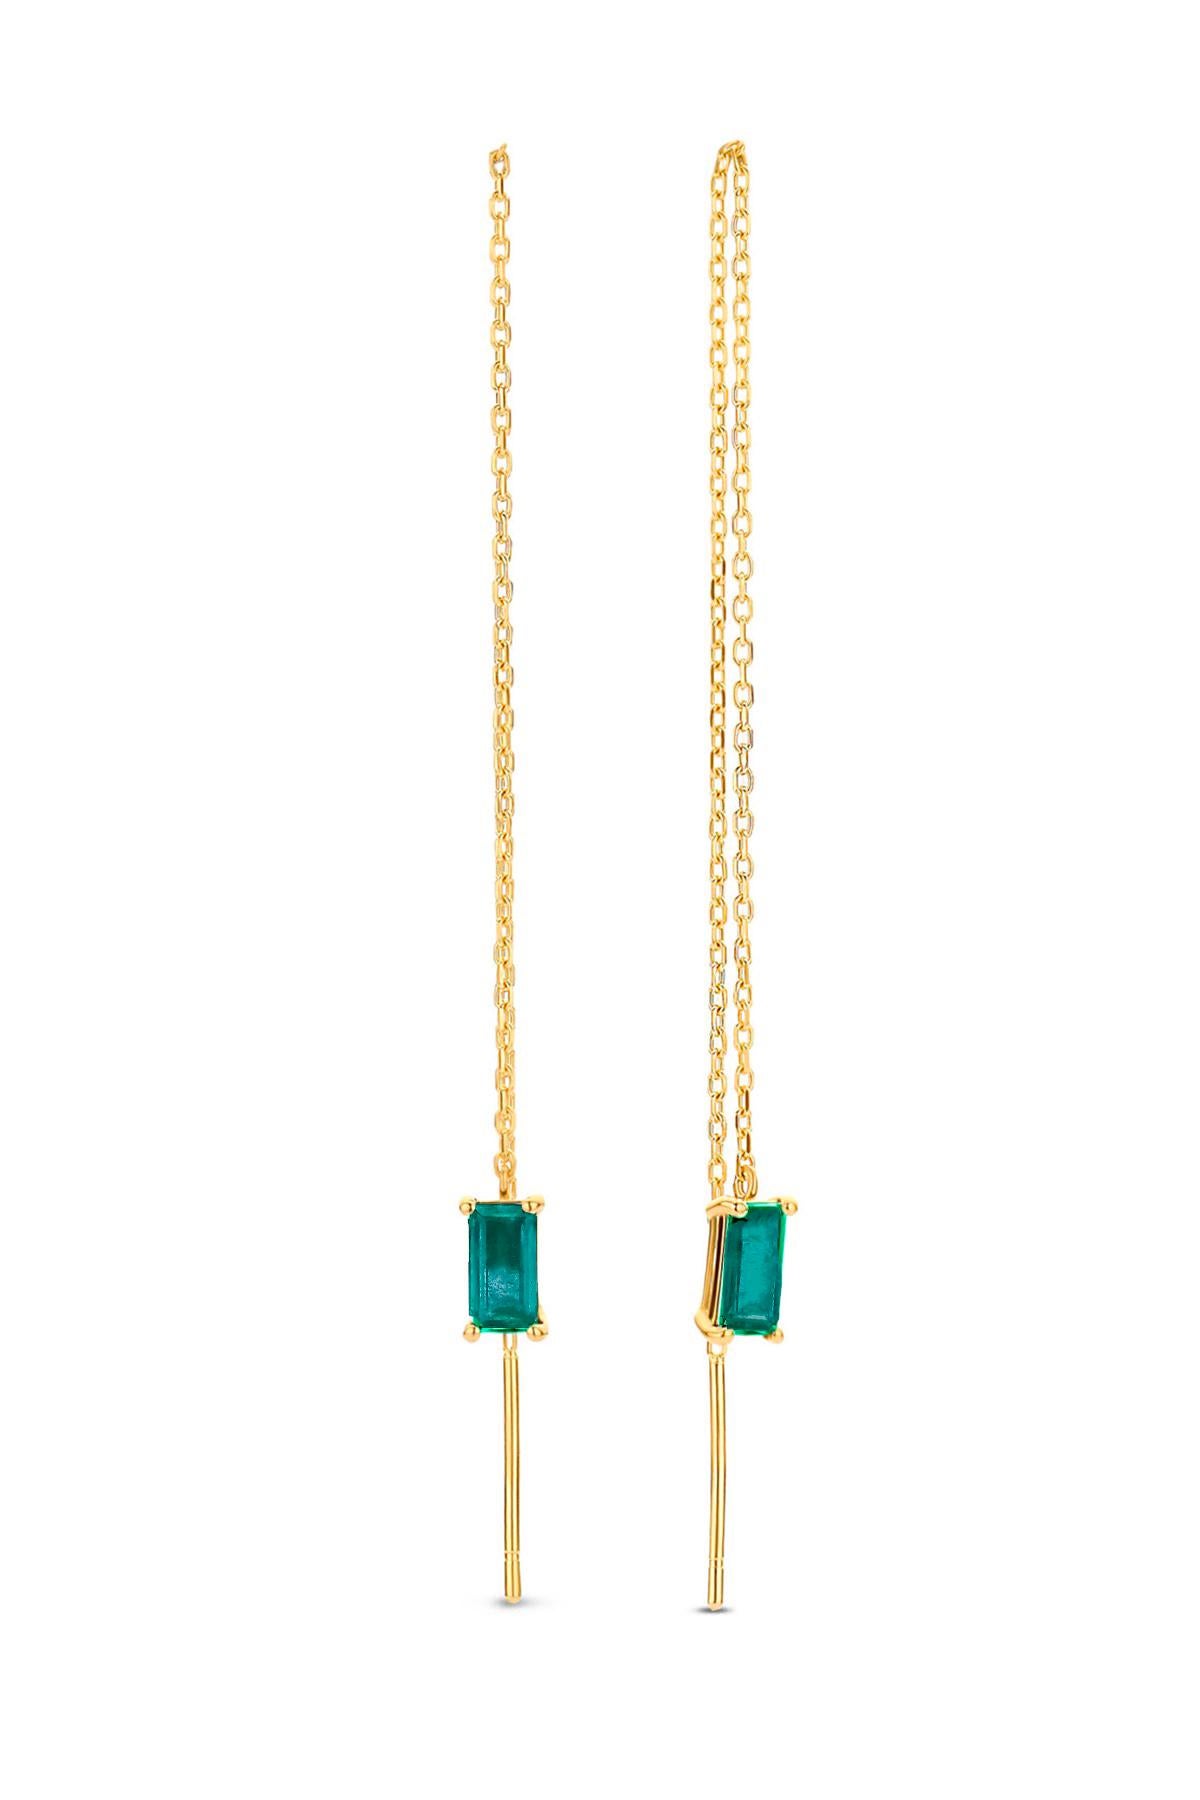 Modern 14k Solid Gold Drop Earrings with emerald.  For Sale